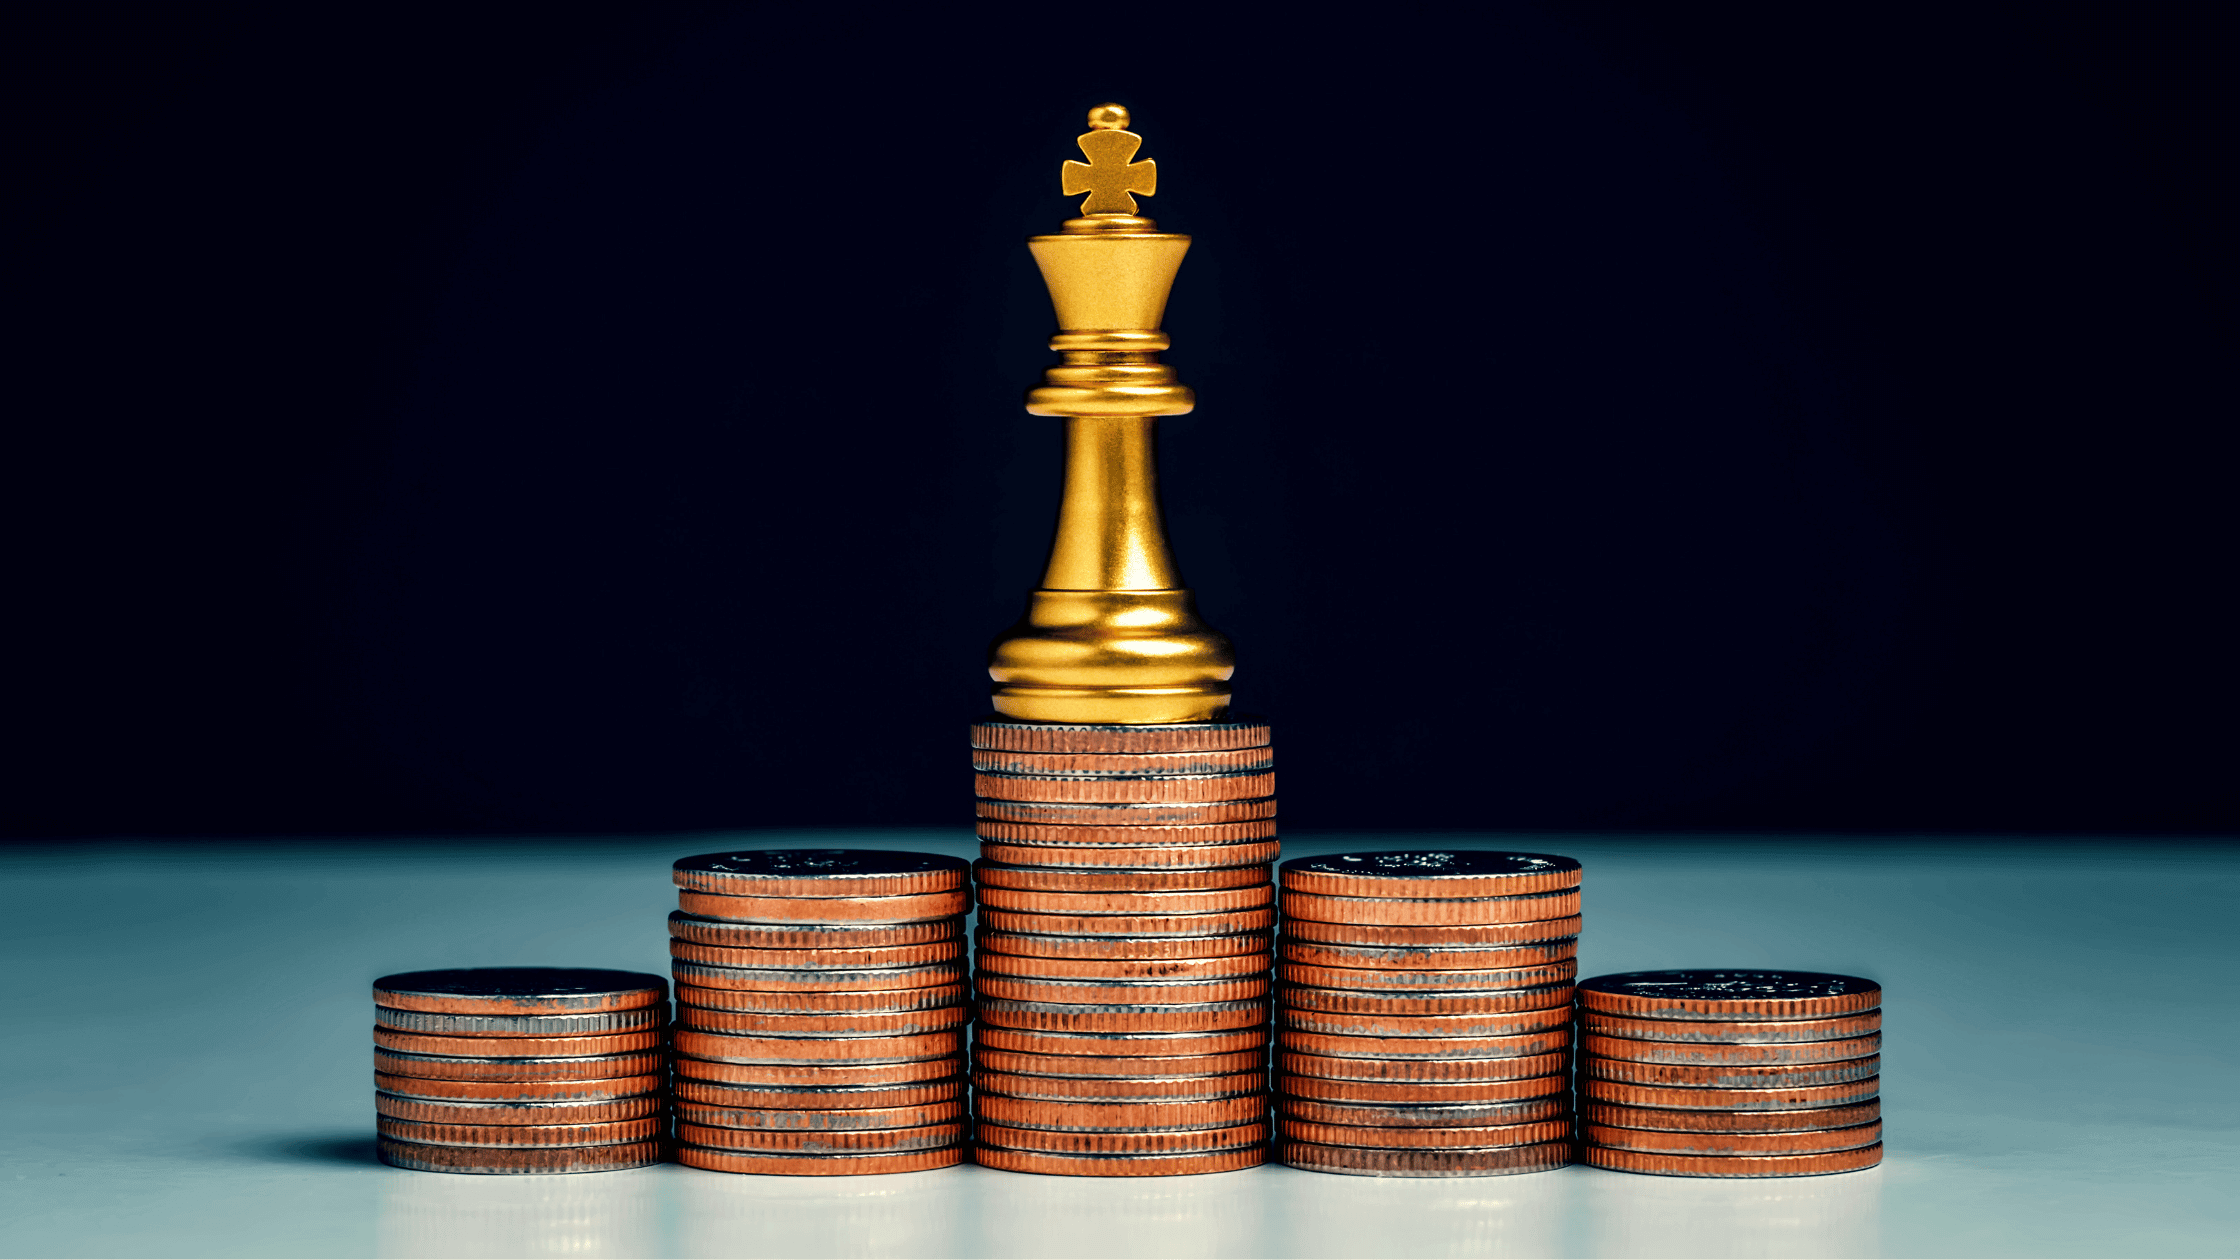 A Chess King piece is sitting on top of a pyramid of coins to symbolize 'cash is king'.